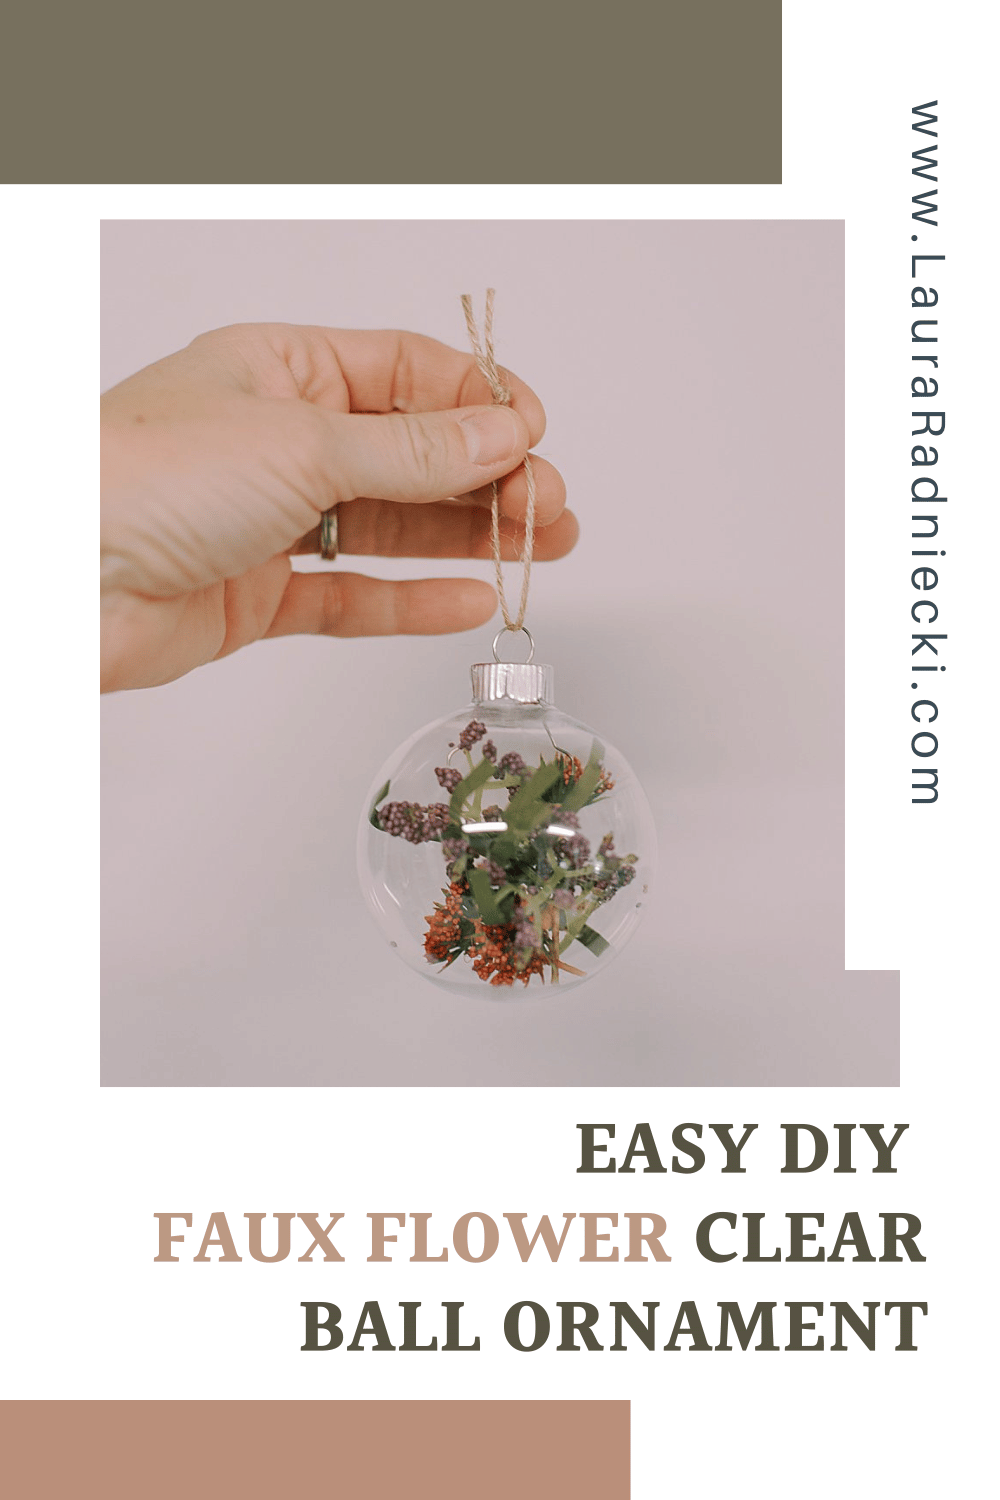 How to Make a Faux Flower Clear Ball Ornament